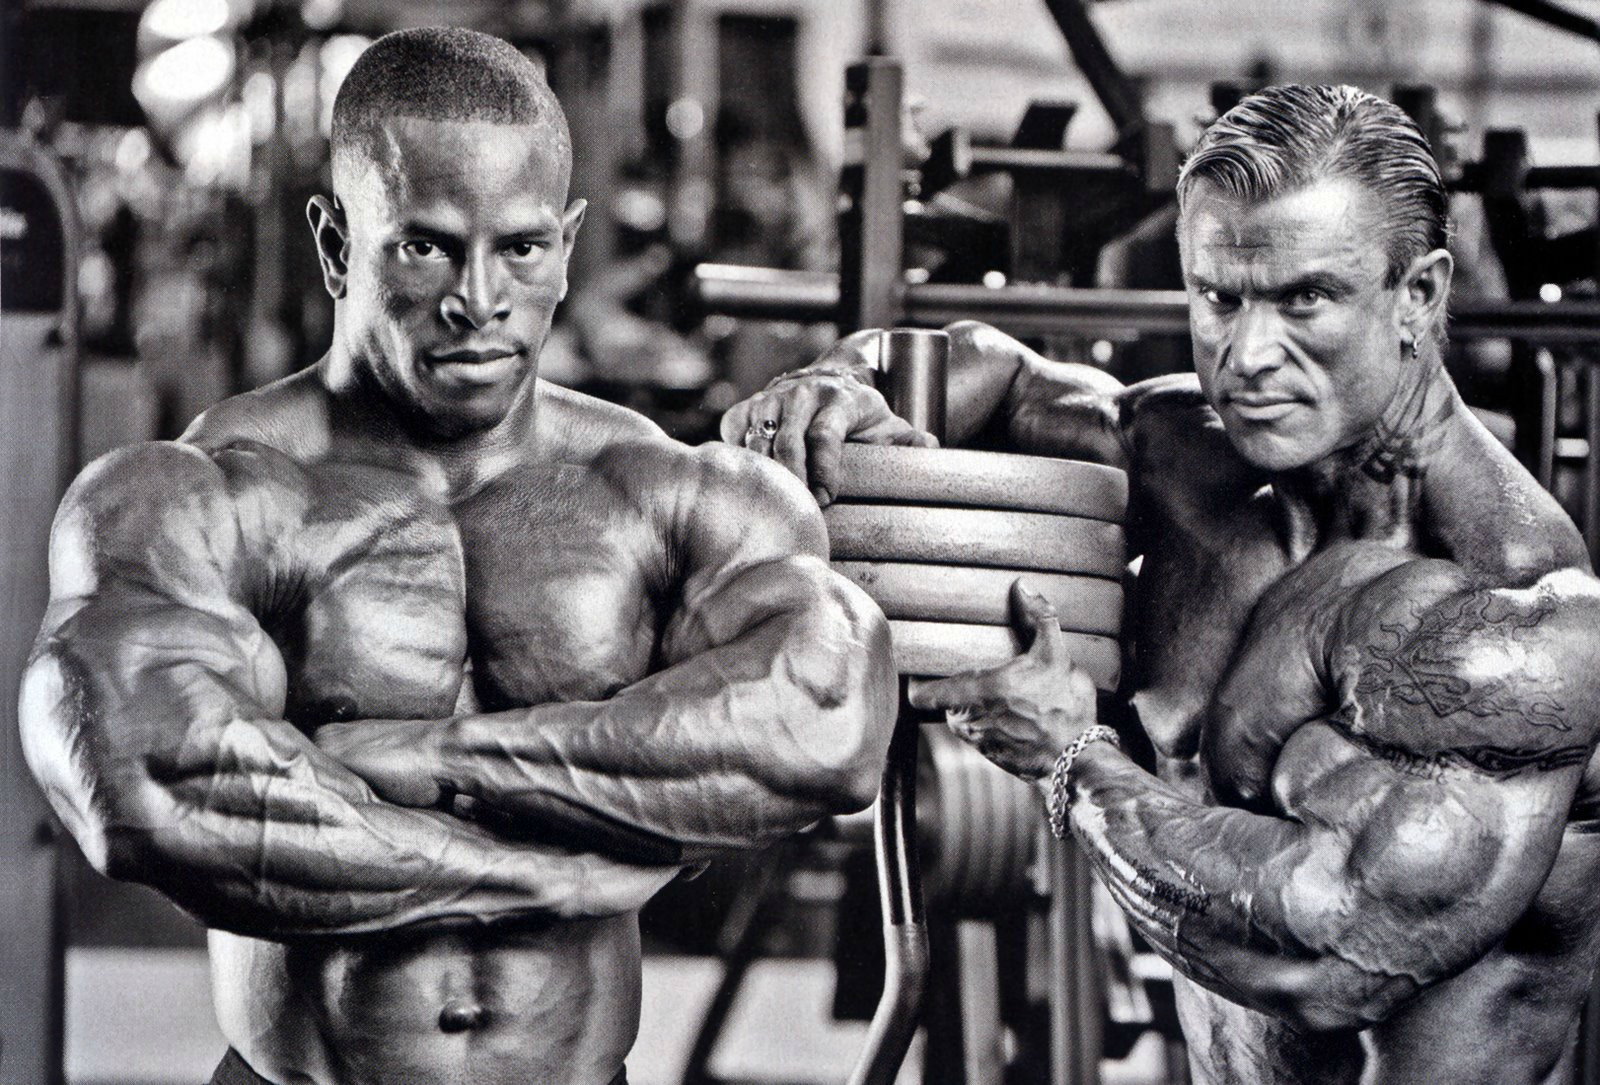 Lee Priest discusses today’s gym scene